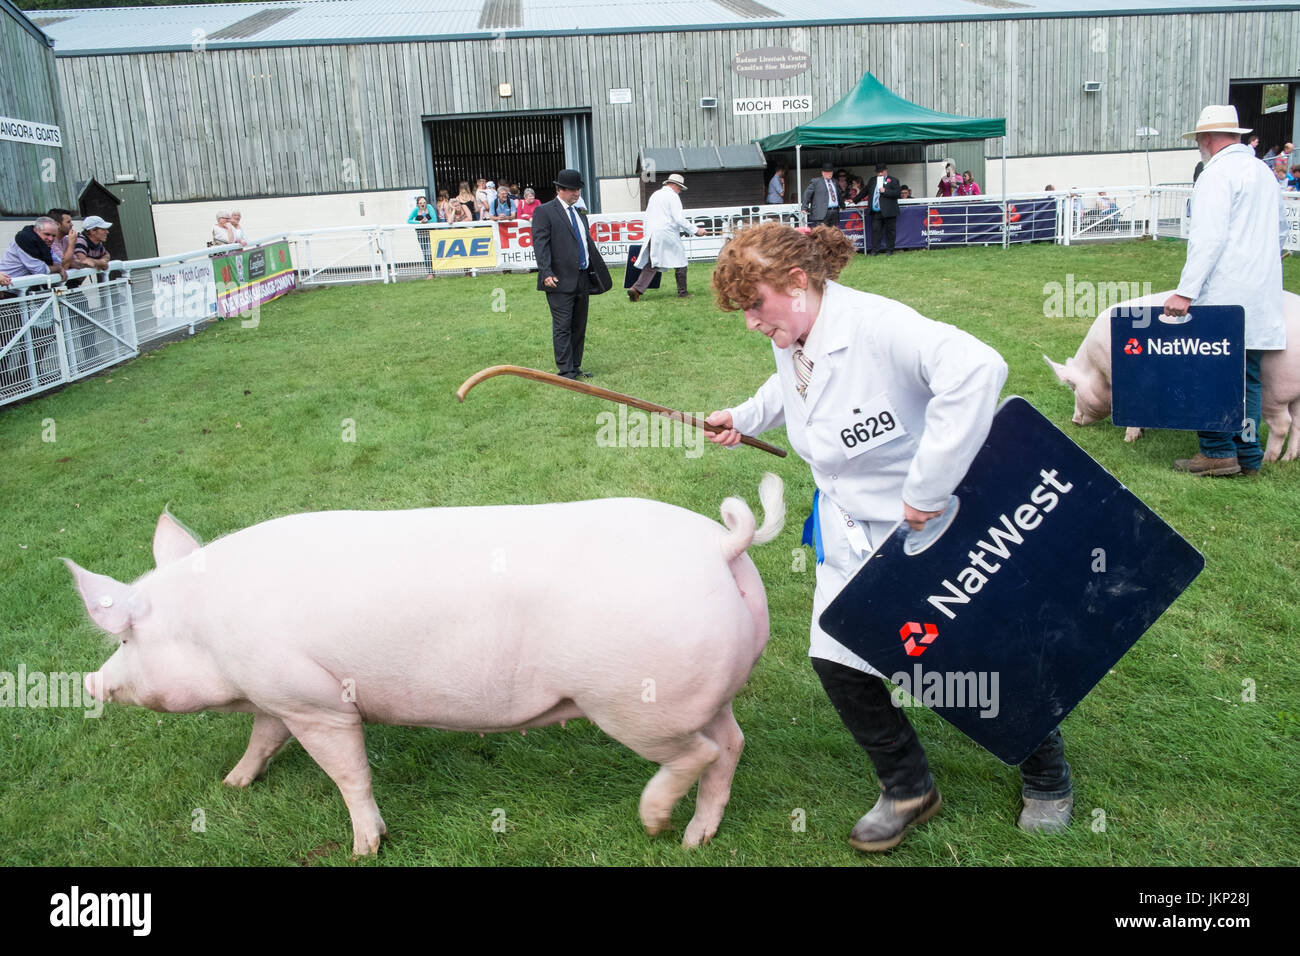 Builth Wells, Wales, UK. 24th July, 2017. Difficult to control 'Large White' breed pig at The Royal Welsh Showground.Llanelwedd,Builth Wells,Powys,Wales,UK.Sunny opening day of the 4 day event,which is the largest of its kind in Europe. Credit: Paul Quayle/Alamy Live News Stock Photo